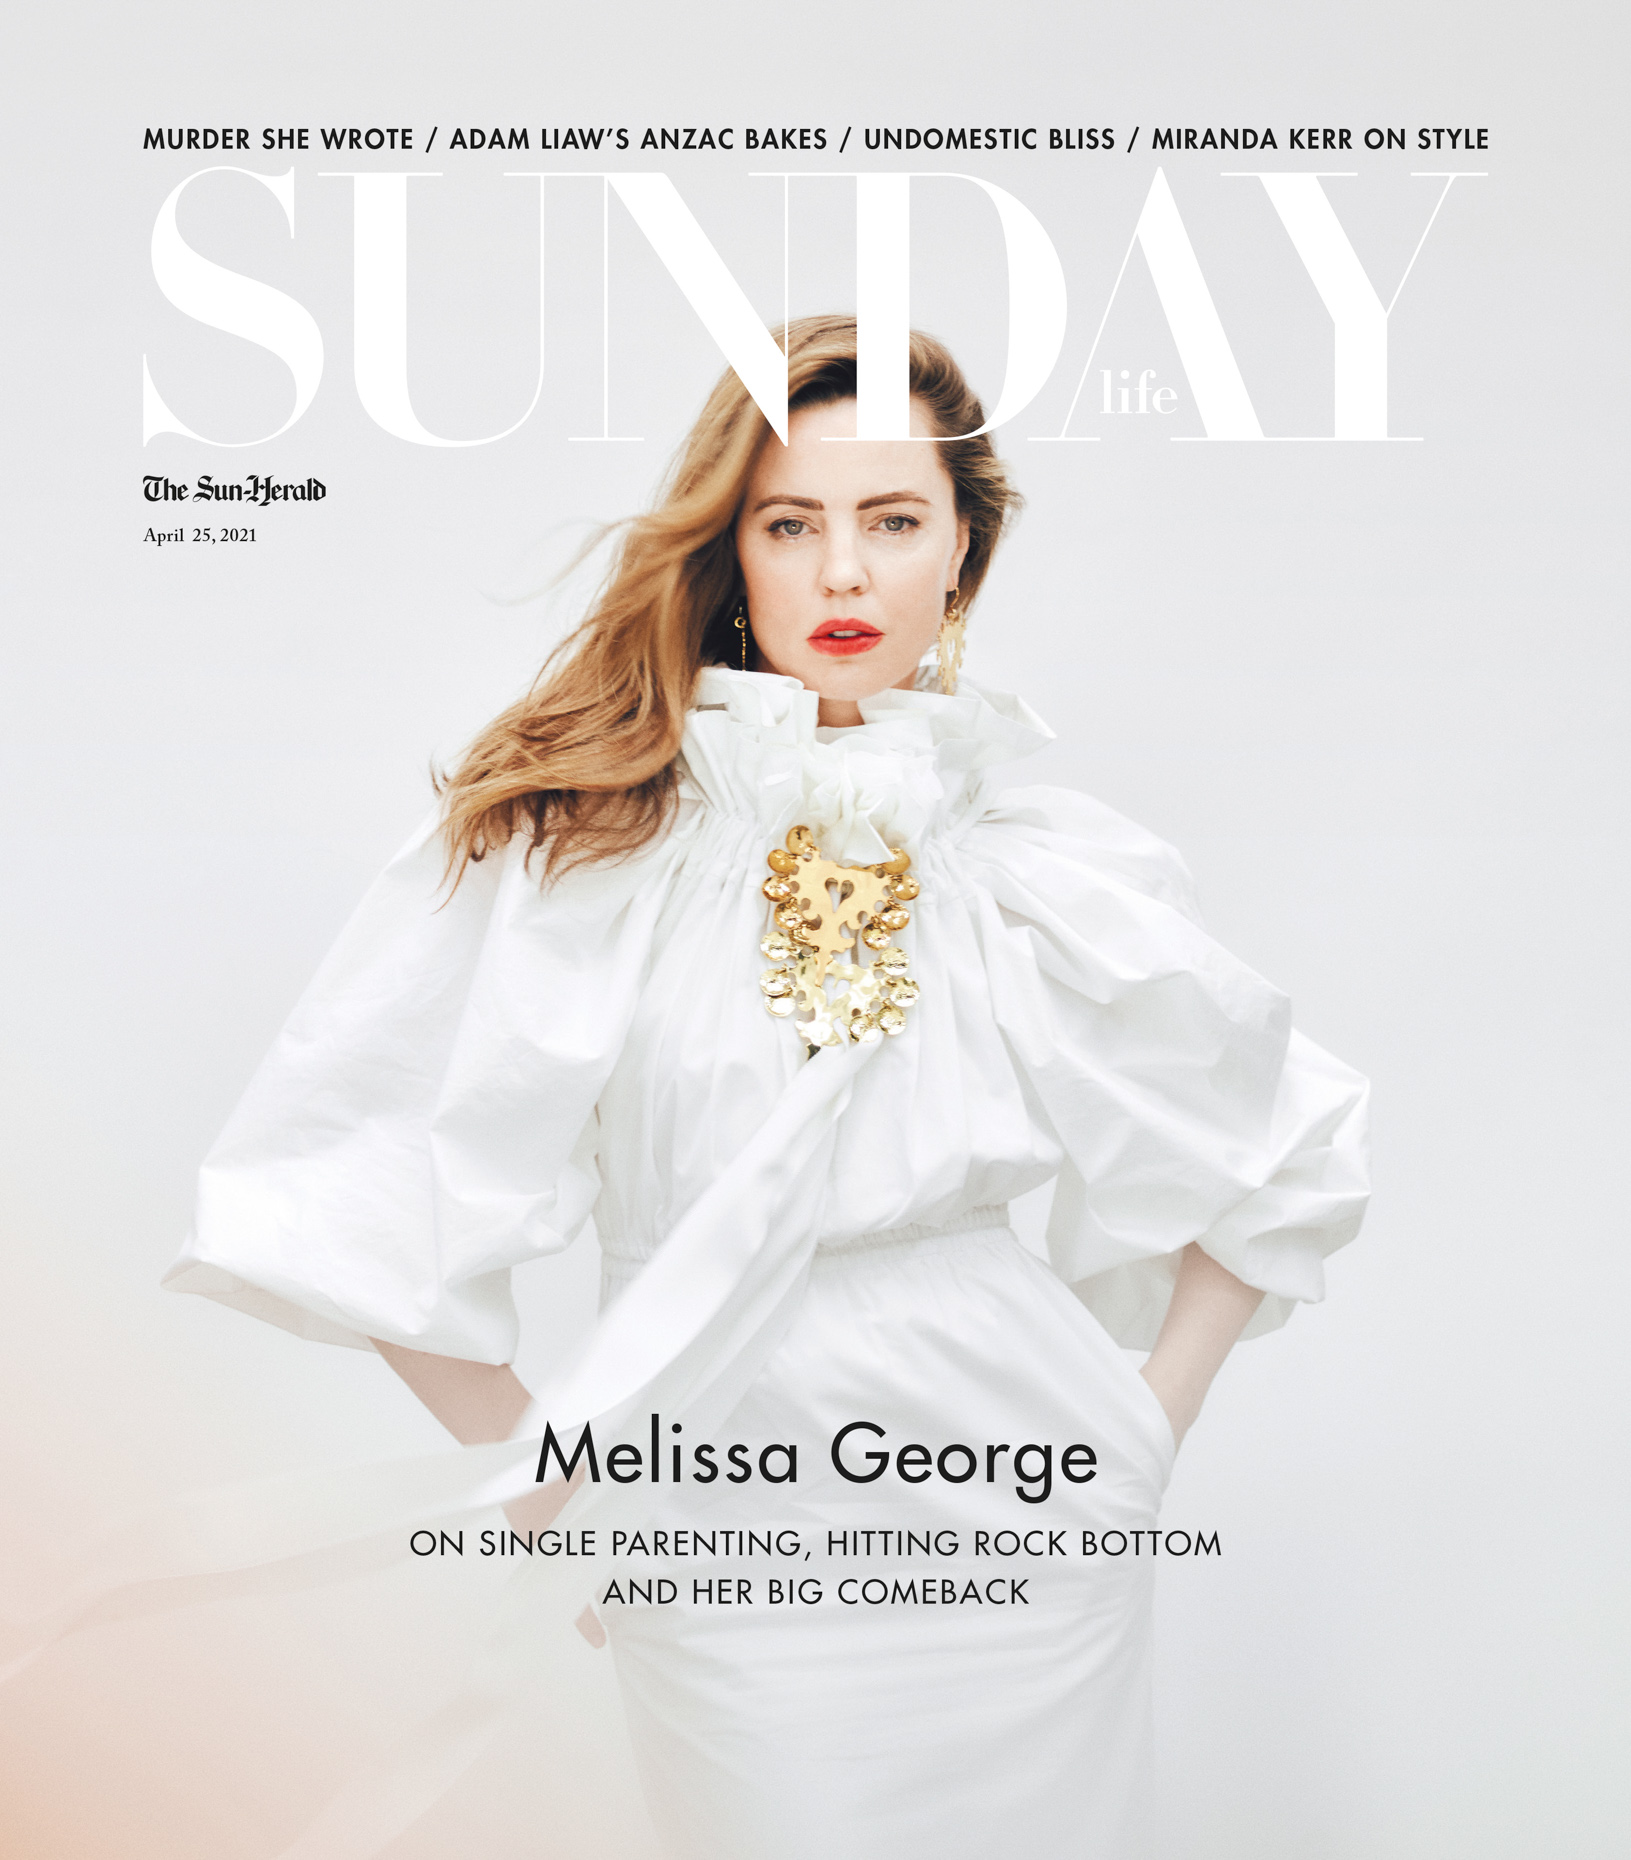 Cover of the Sunday Life with Melissa George